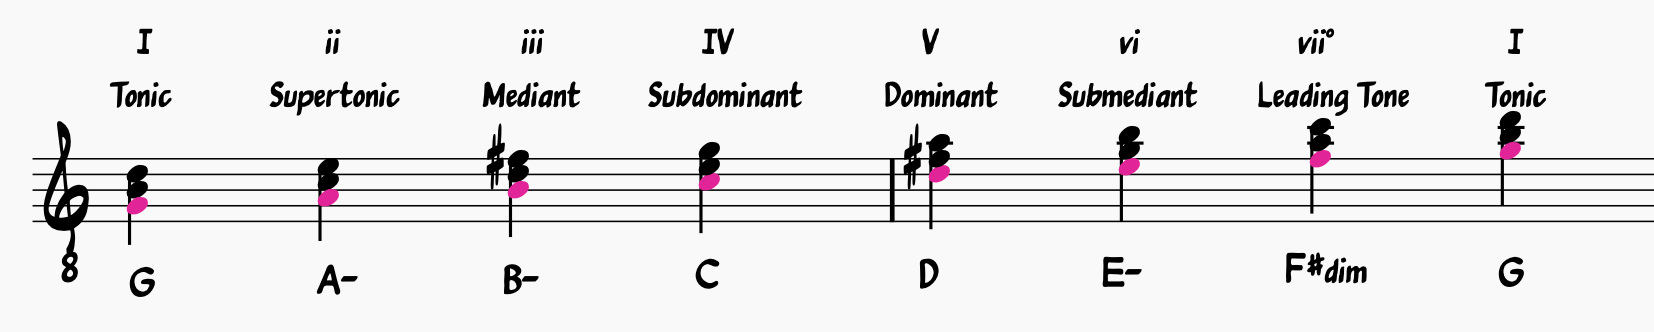 Diatonic Triads in the Key of G Major with Roman Numerals; G major scale outlined in Red